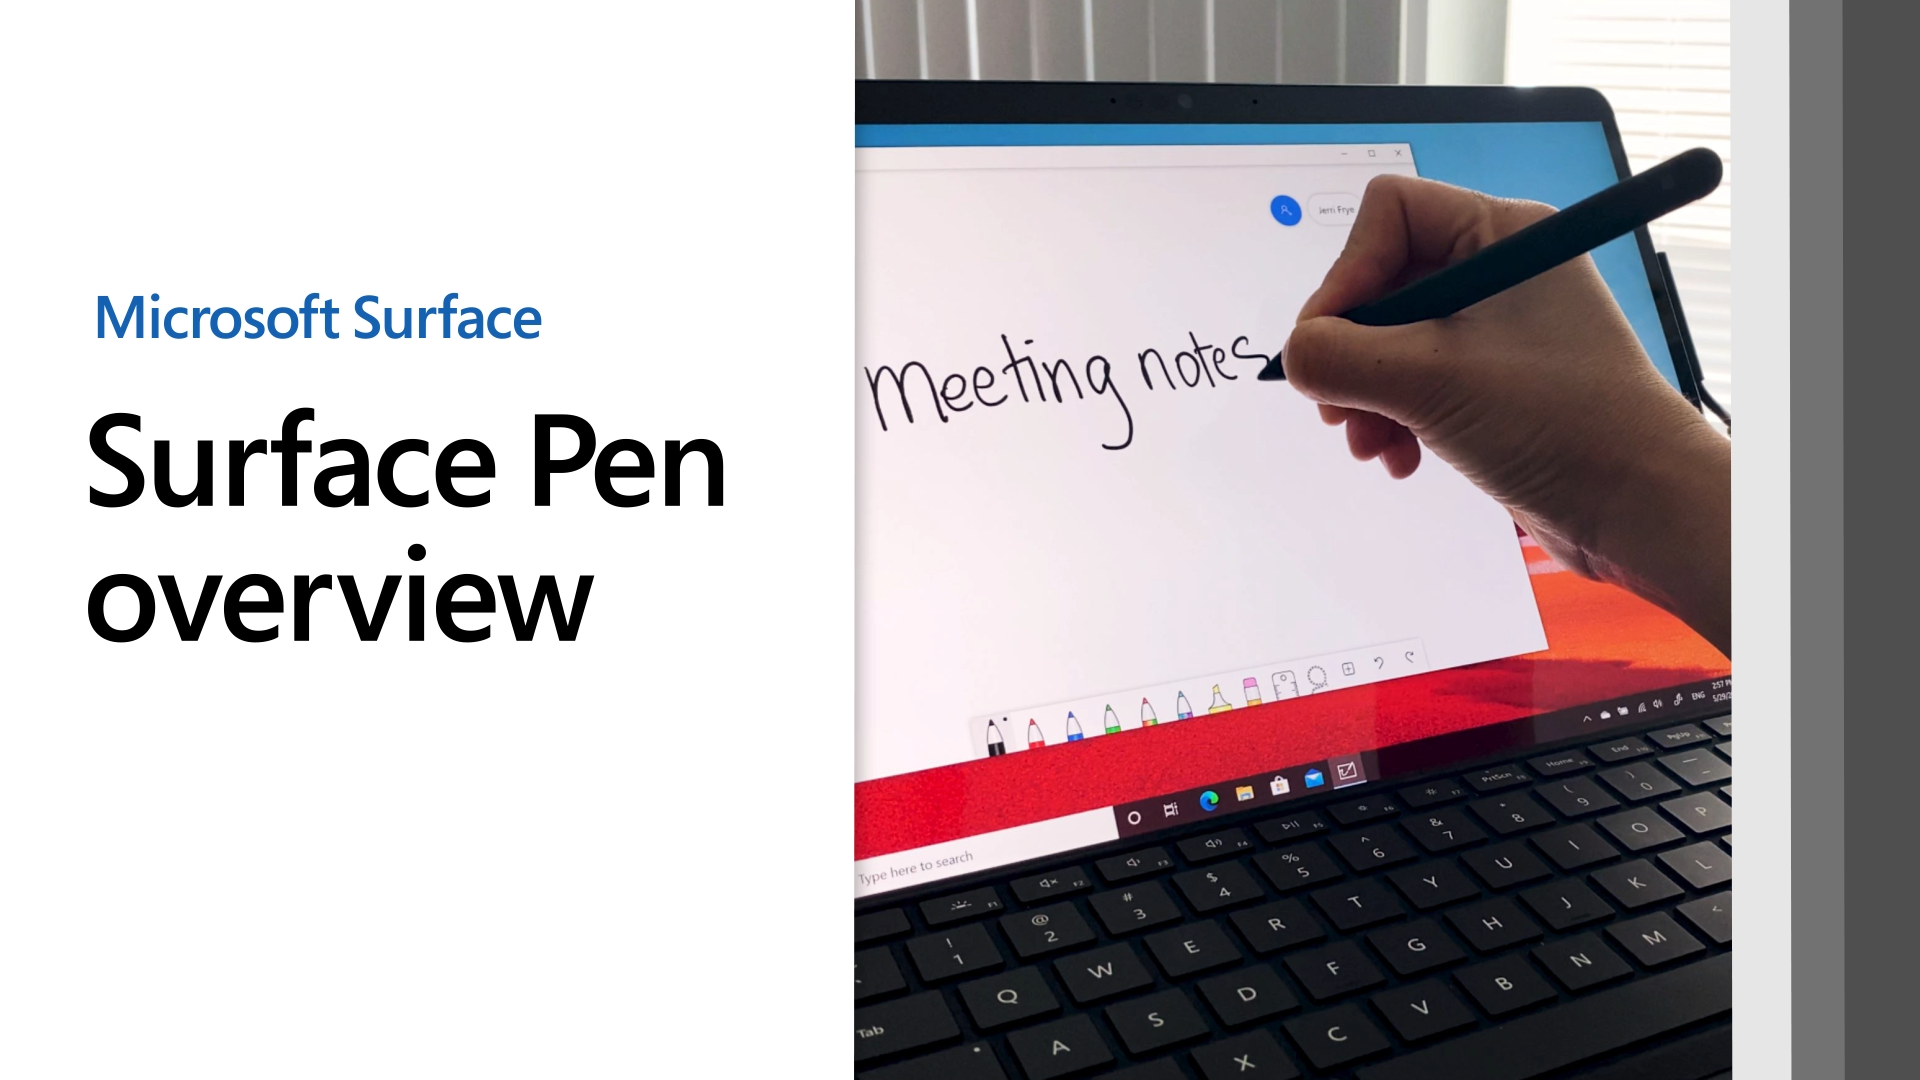 How to use your Surface Pen - Microsoft Support